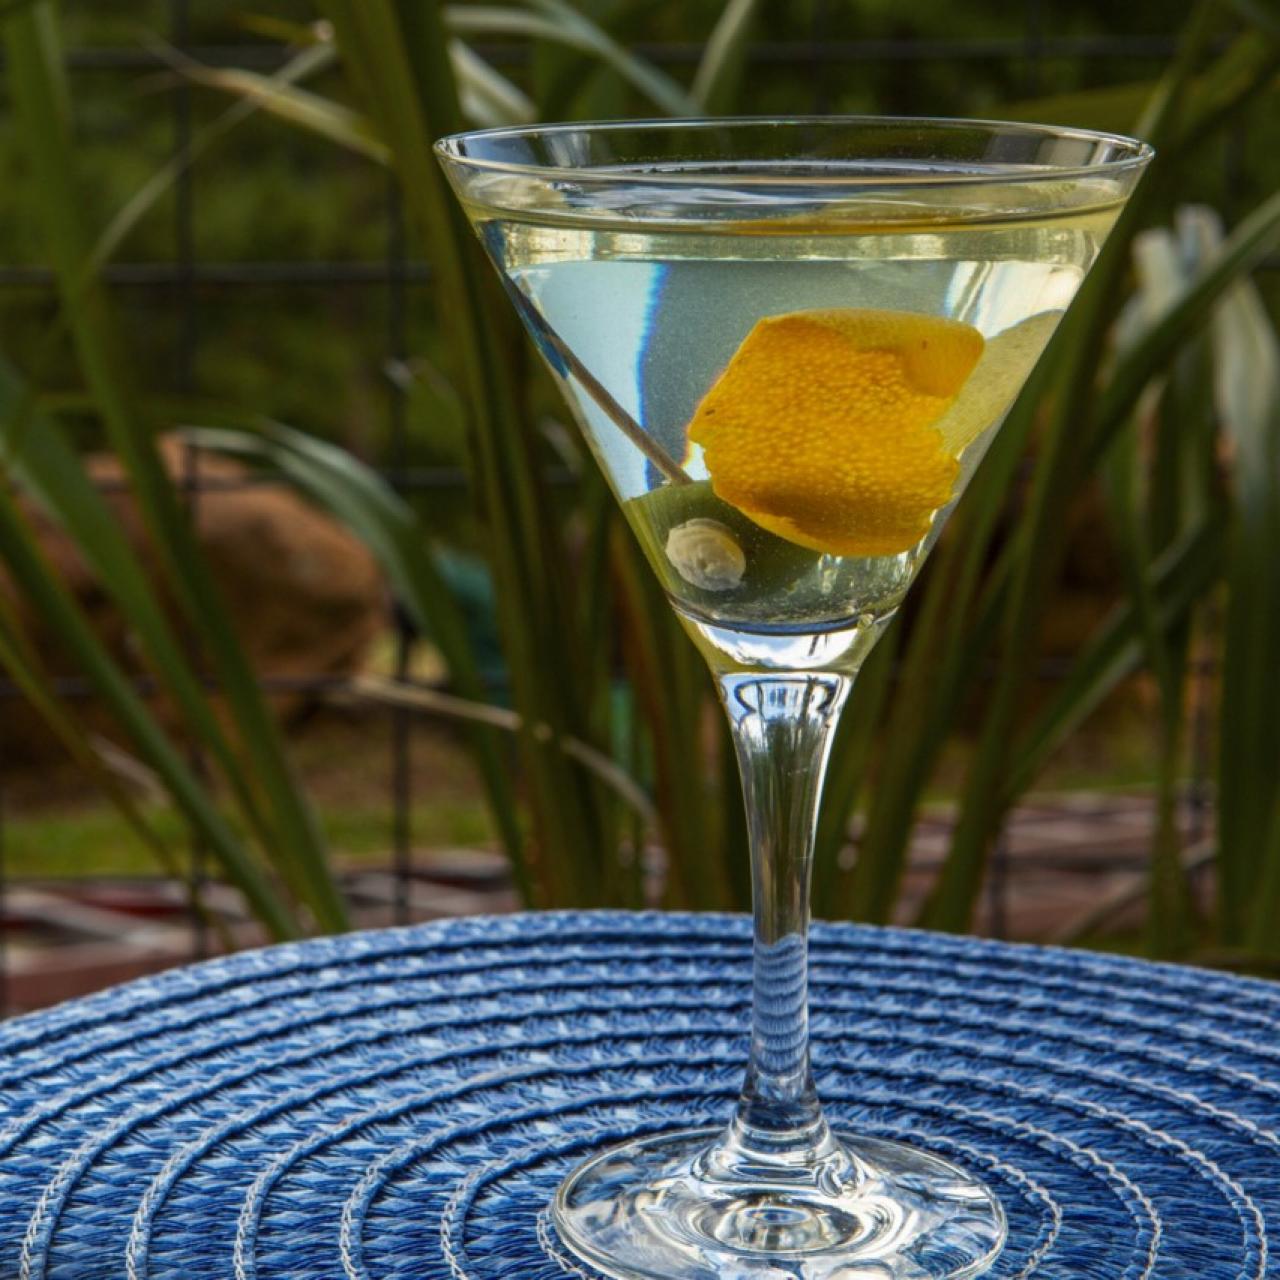 How to Make a Dry Martini Cocktail - Food Faith Fitness